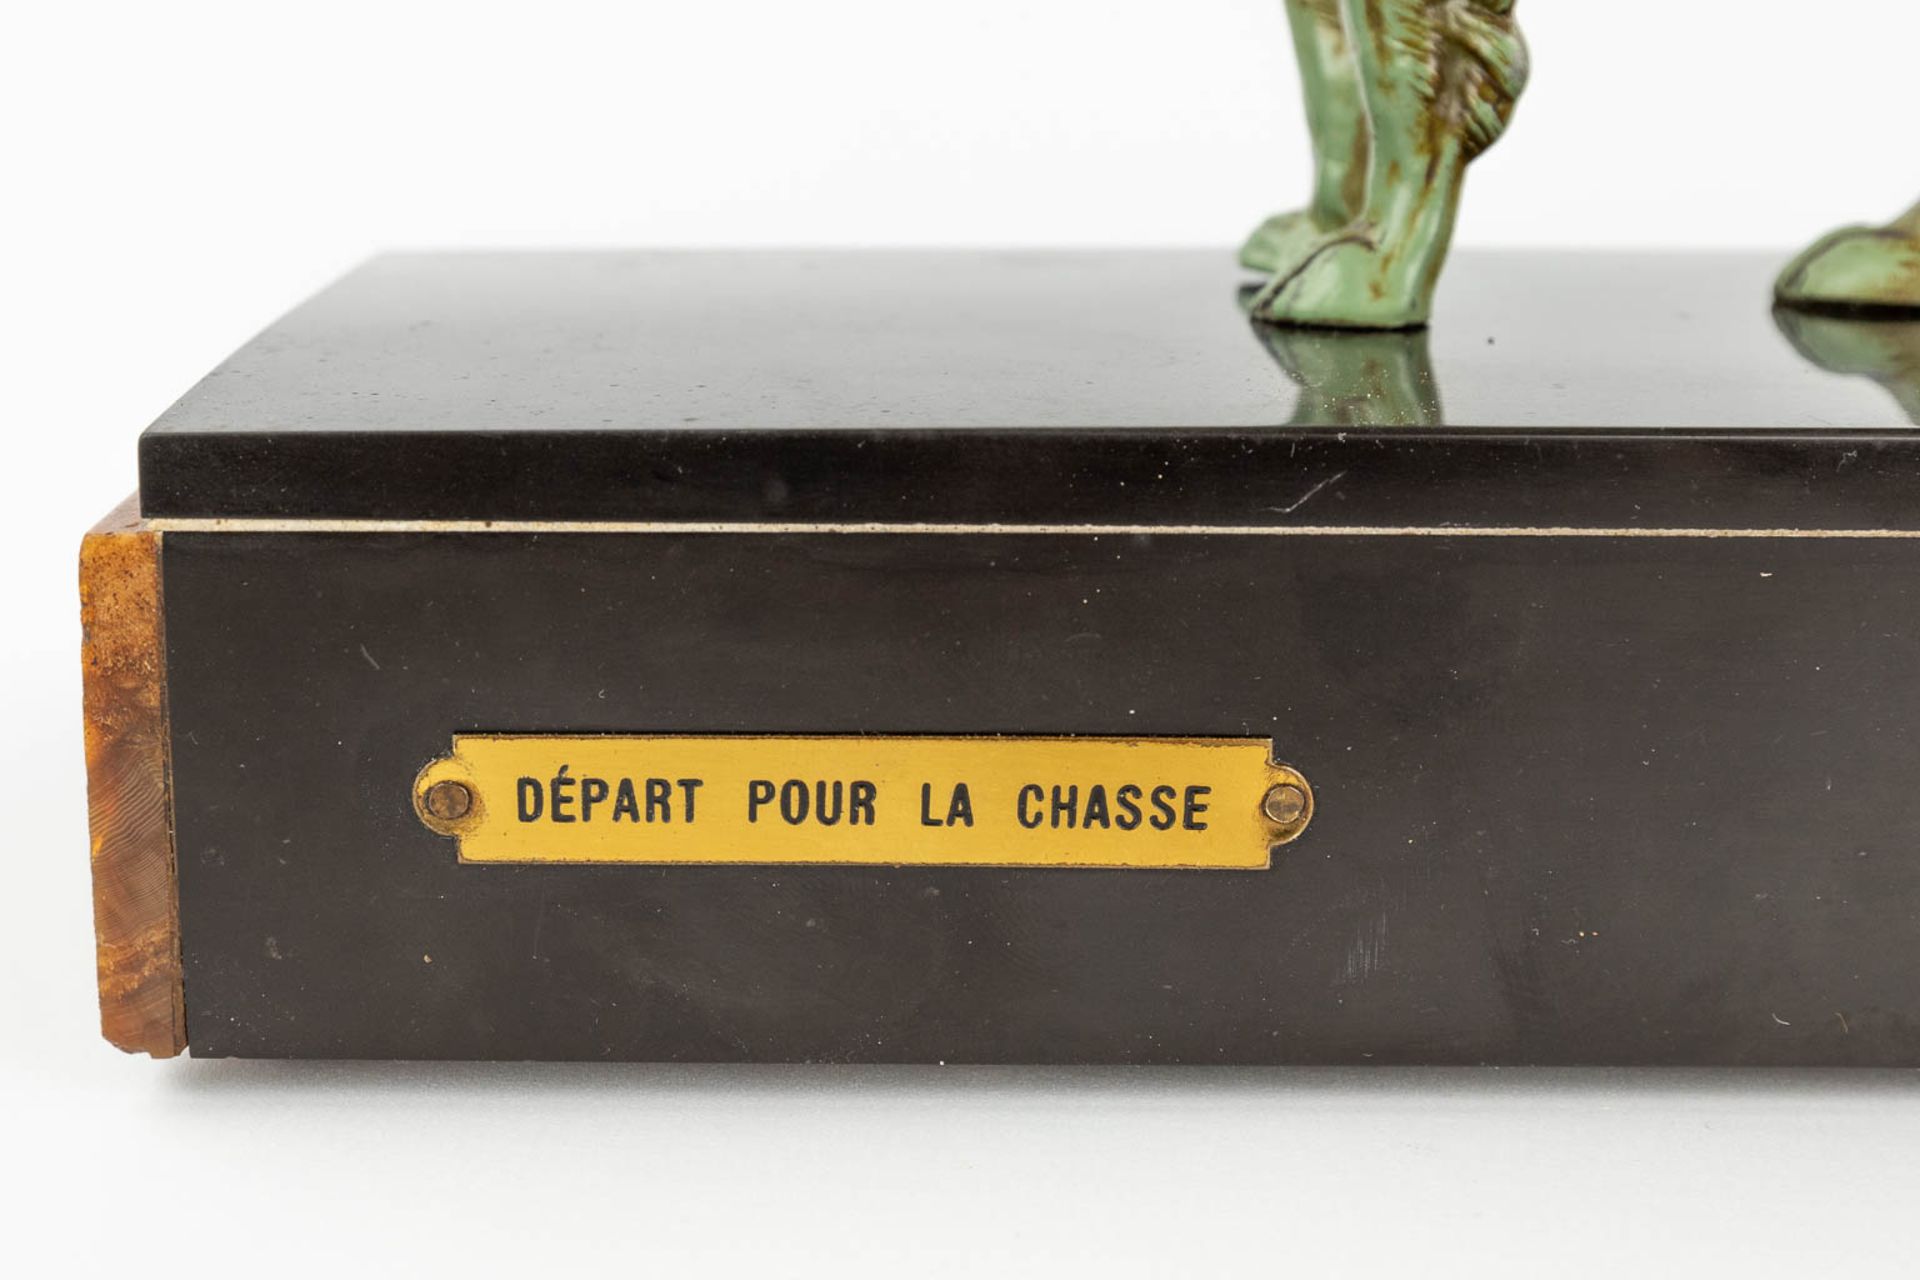 'Depart Pour La Chasse', a statue made in art deco style of marble and spelter. (12 x 67 x 45cm) - Image 8 of 13